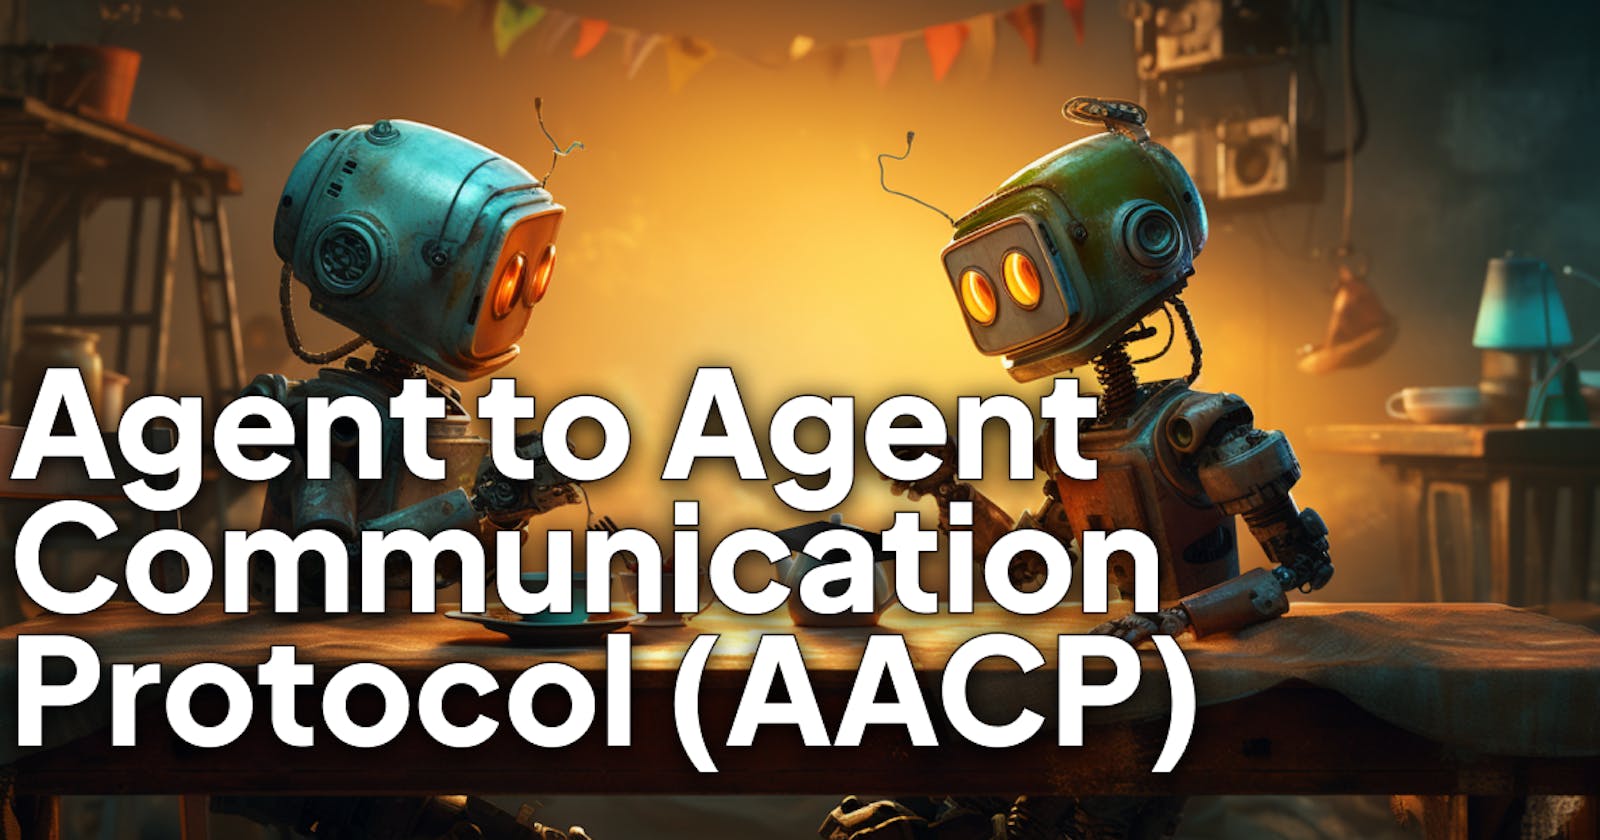 Introducing AACP (Agent to Agent Communication Protocol)